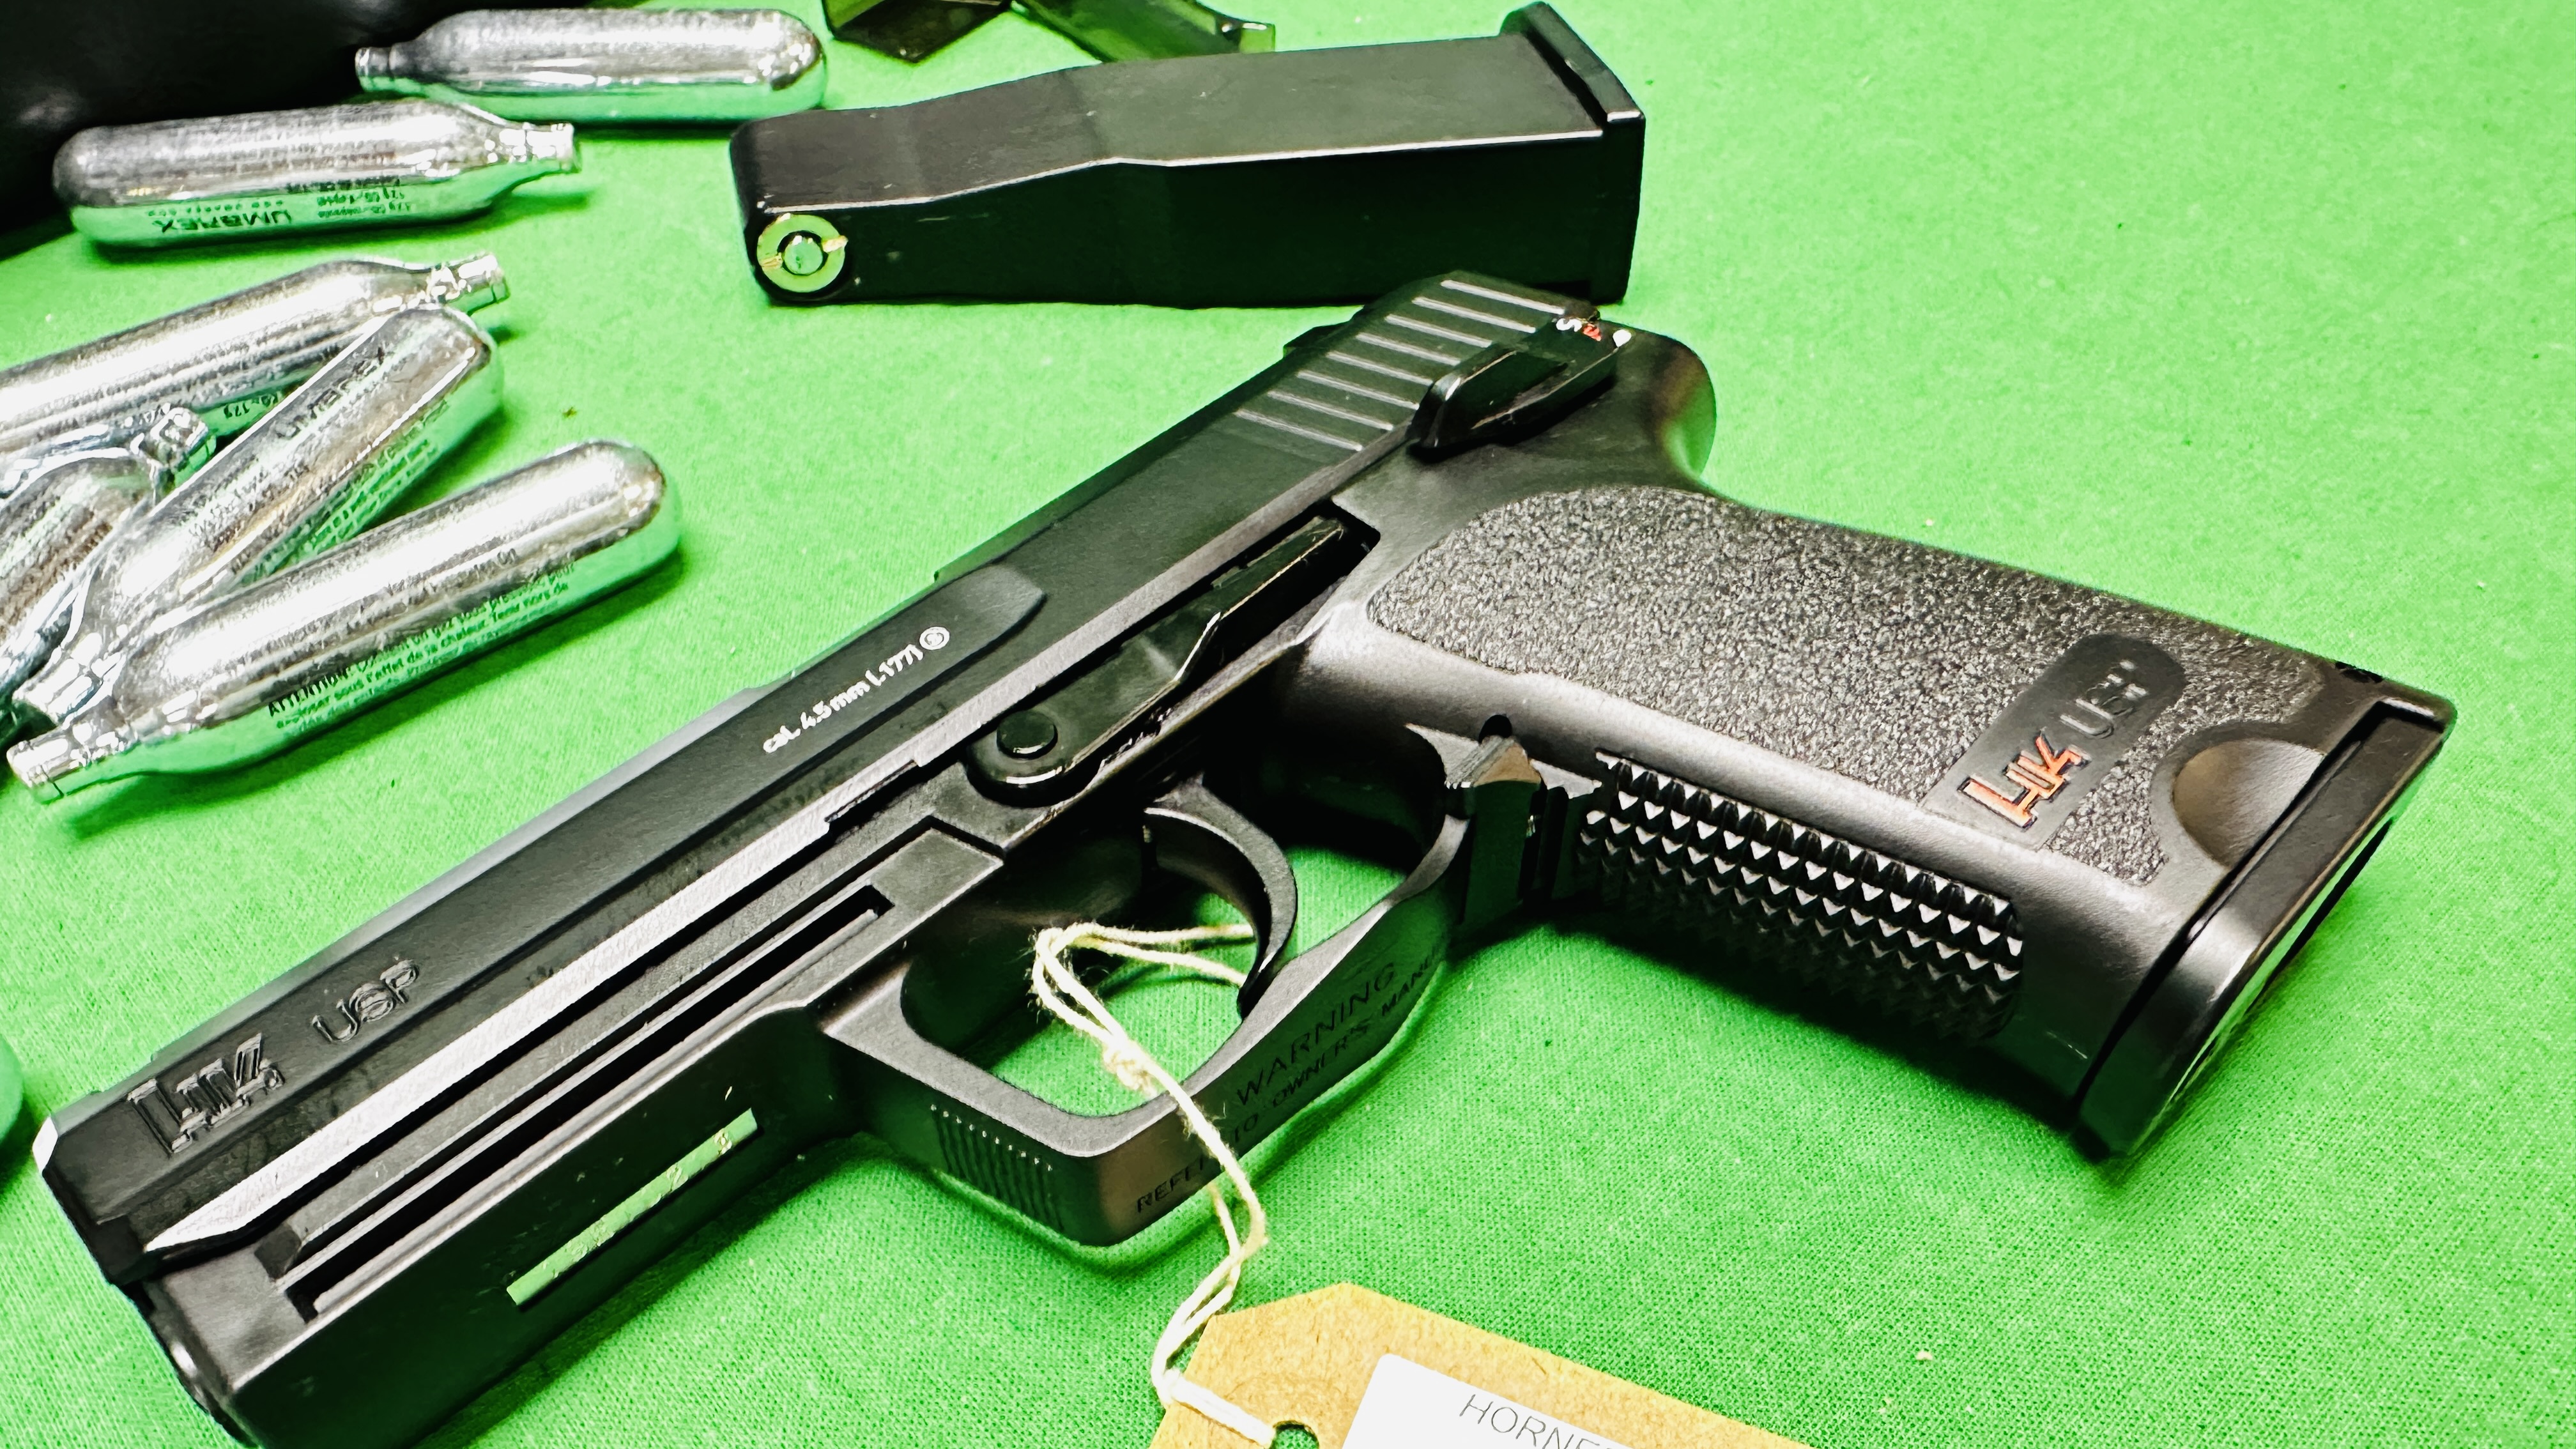 A BOXED HECKLER & KOCH USP 22 ROUND CO2 STELL BB AIR PISTOL COMPLETE WITH HARD TRANSIT CASE, - Image 5 of 15